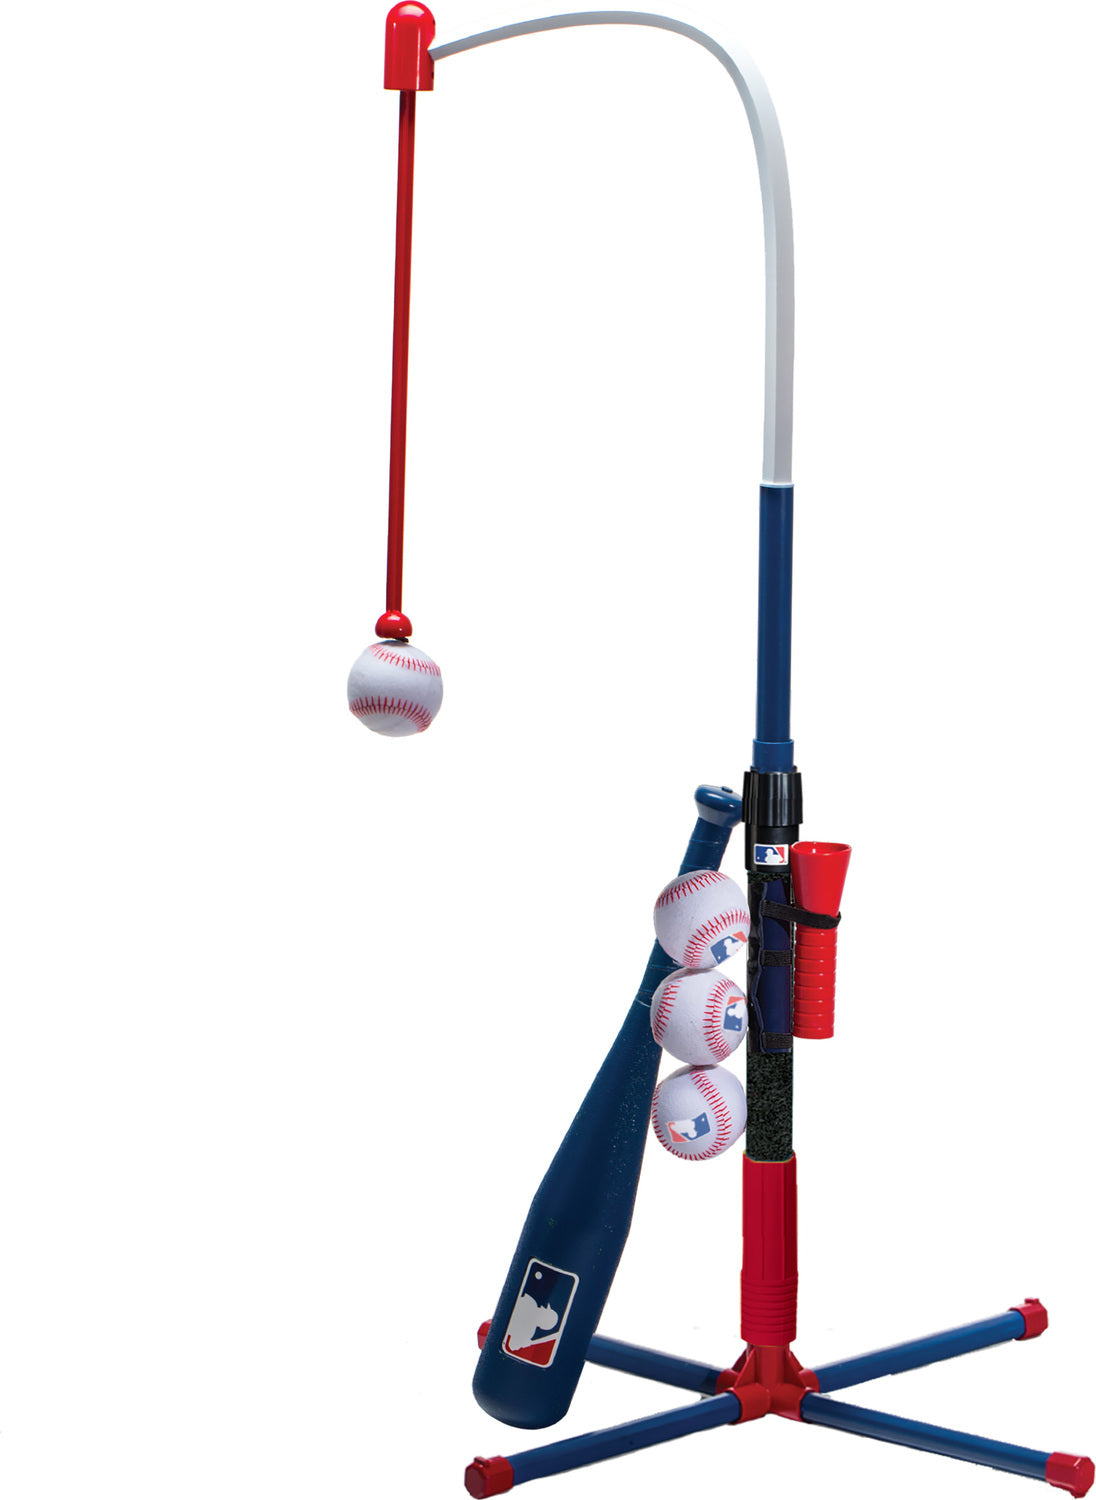 MLB 2In1 Grow-with-Me Batting Tee